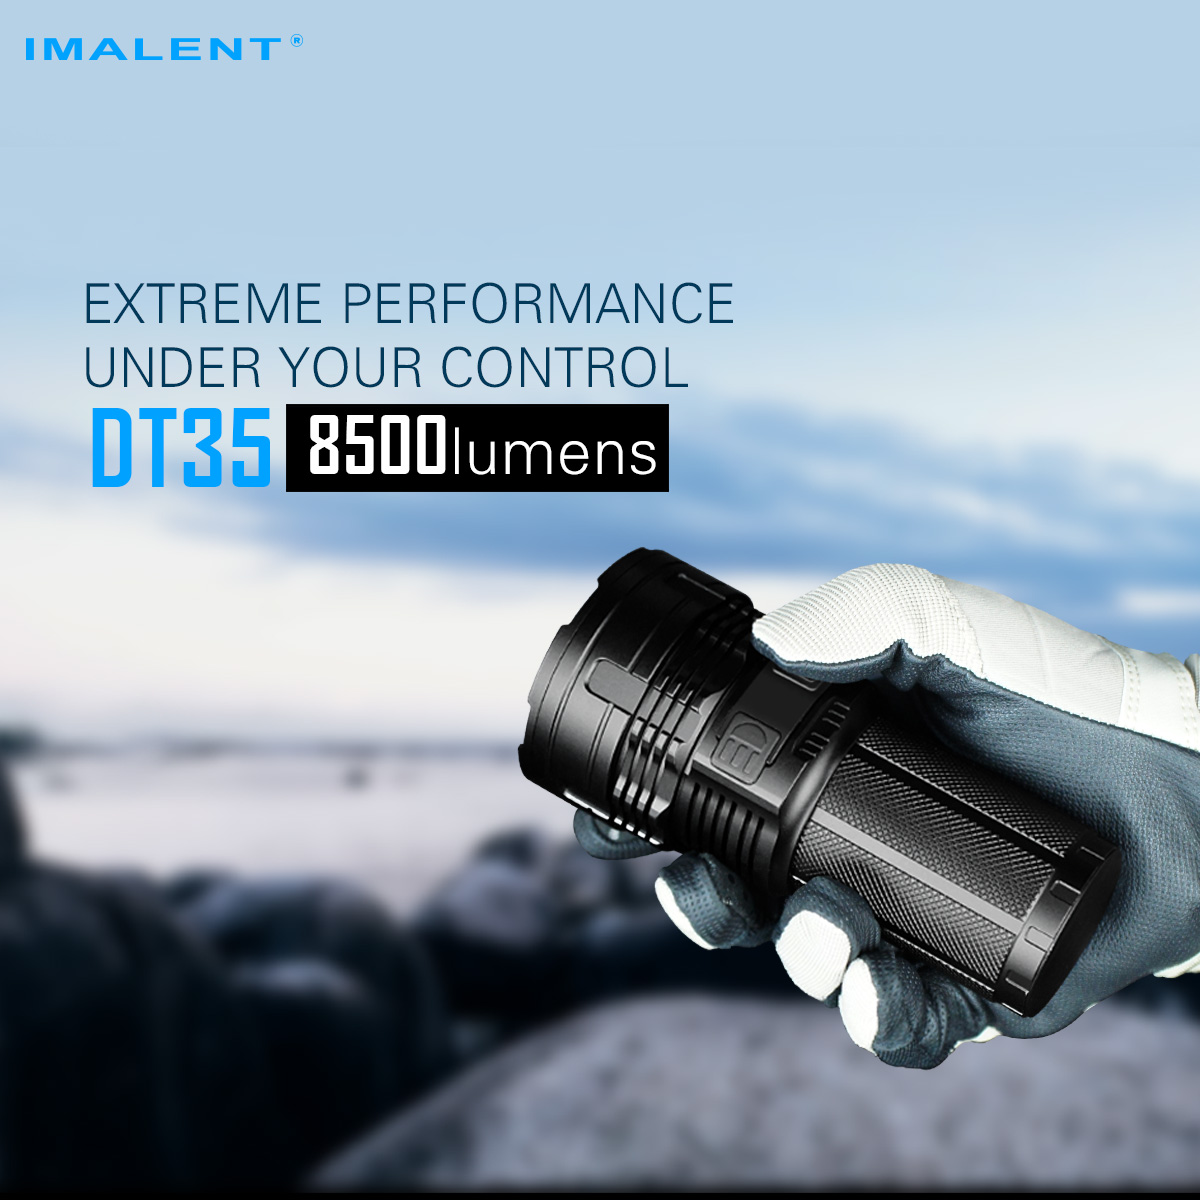 IMALENT DT35 A versatile USB rechargeable LED tactical flashlight with multi-level output and an OLED display